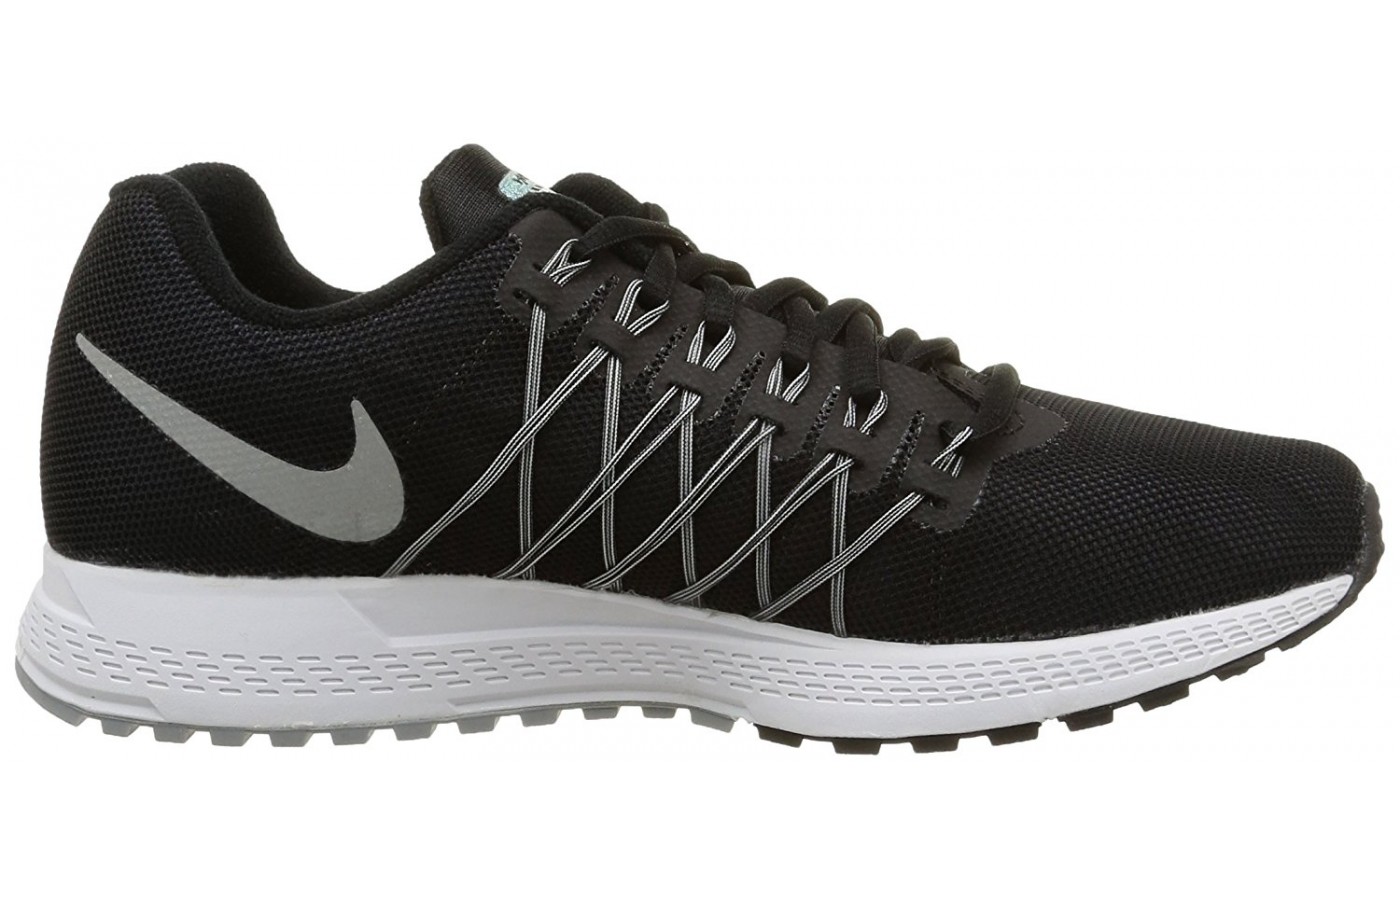 A side view of the Nike Zoom Pegasus 32 running shoe.